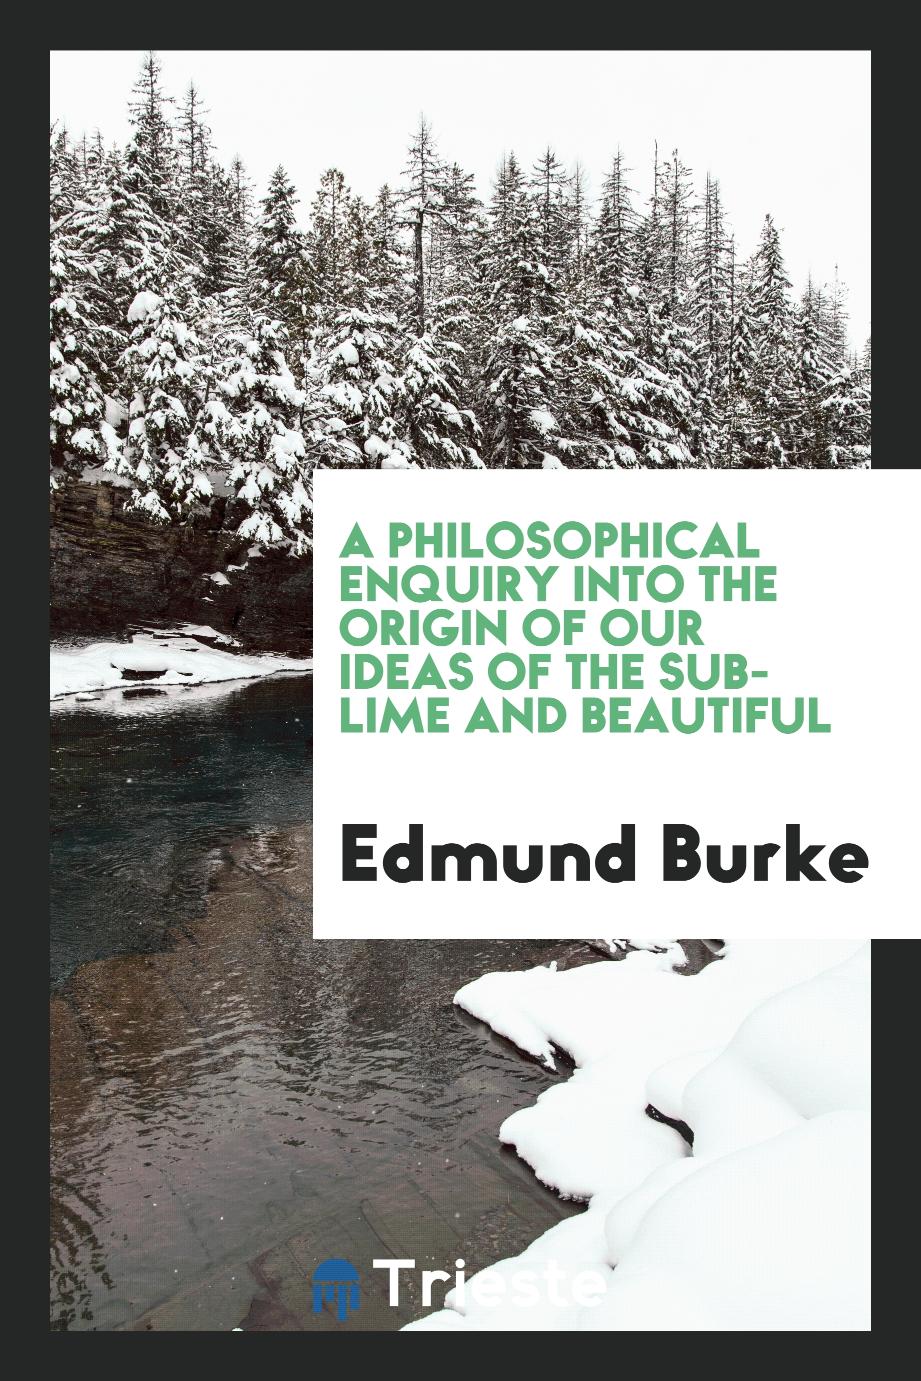 A philosophical enquiry into the origin of our ideas of the sublime and beautiful